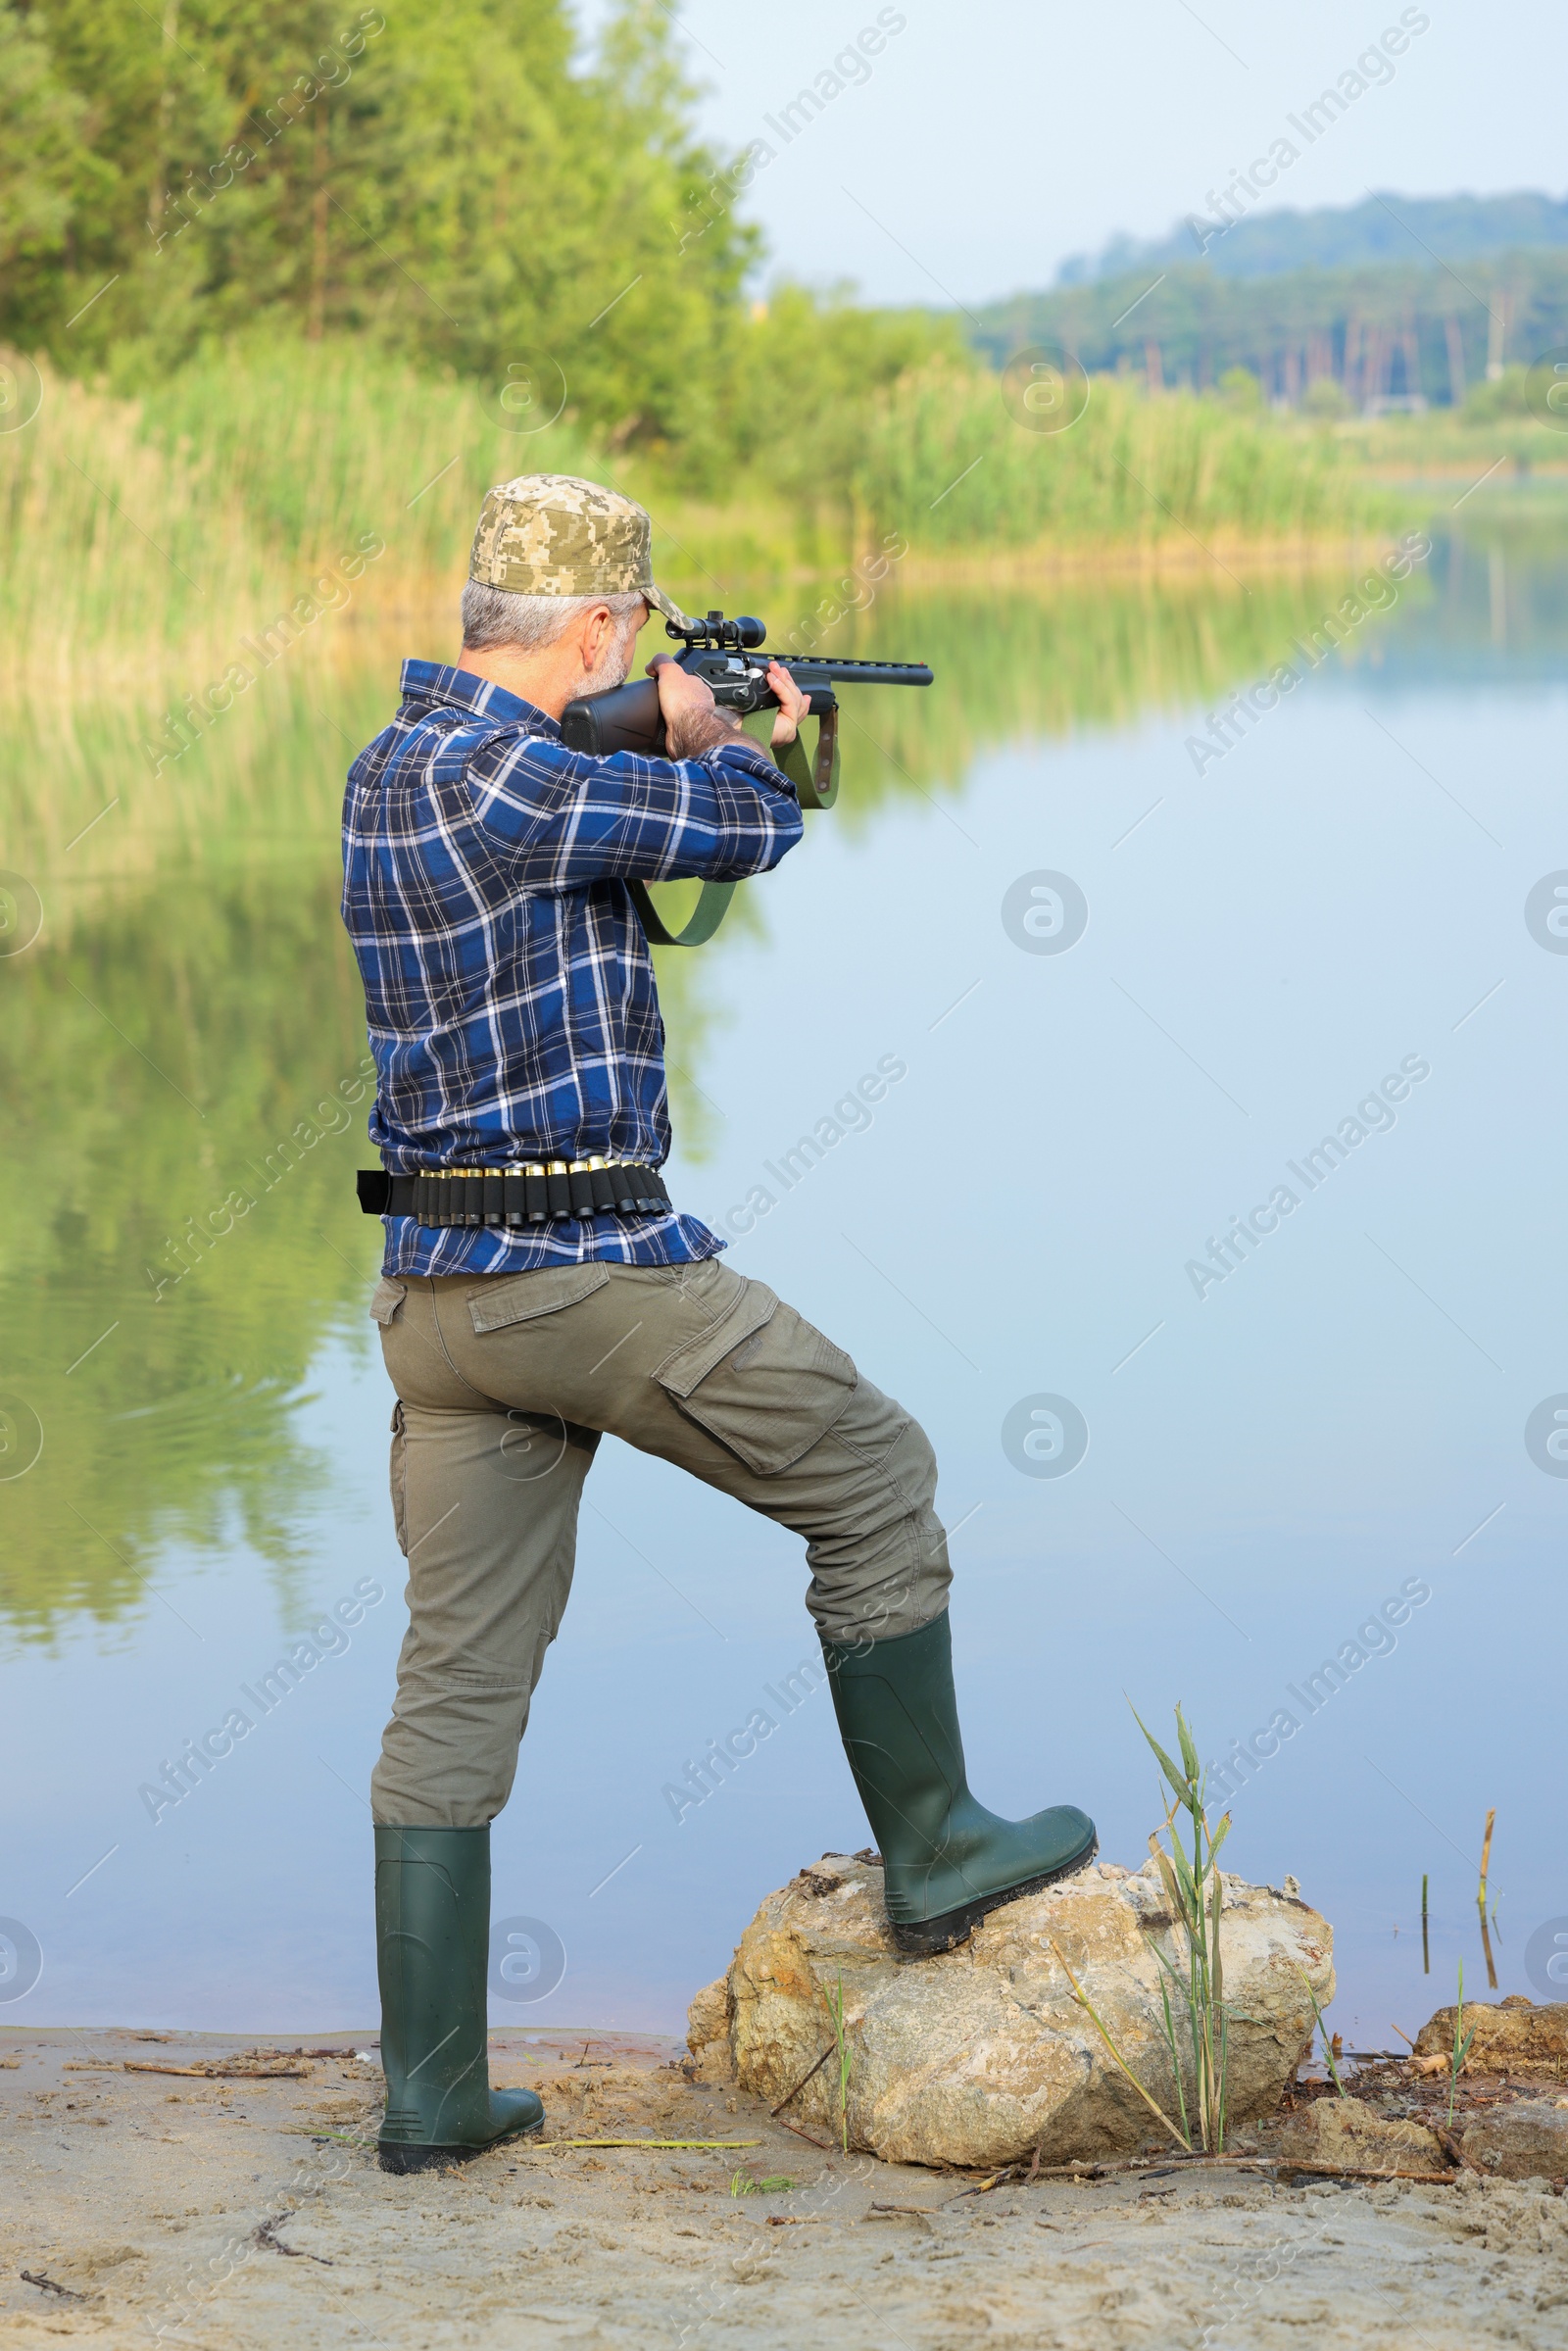 Photo of Man aiming with hunting rifle near lake outdoors